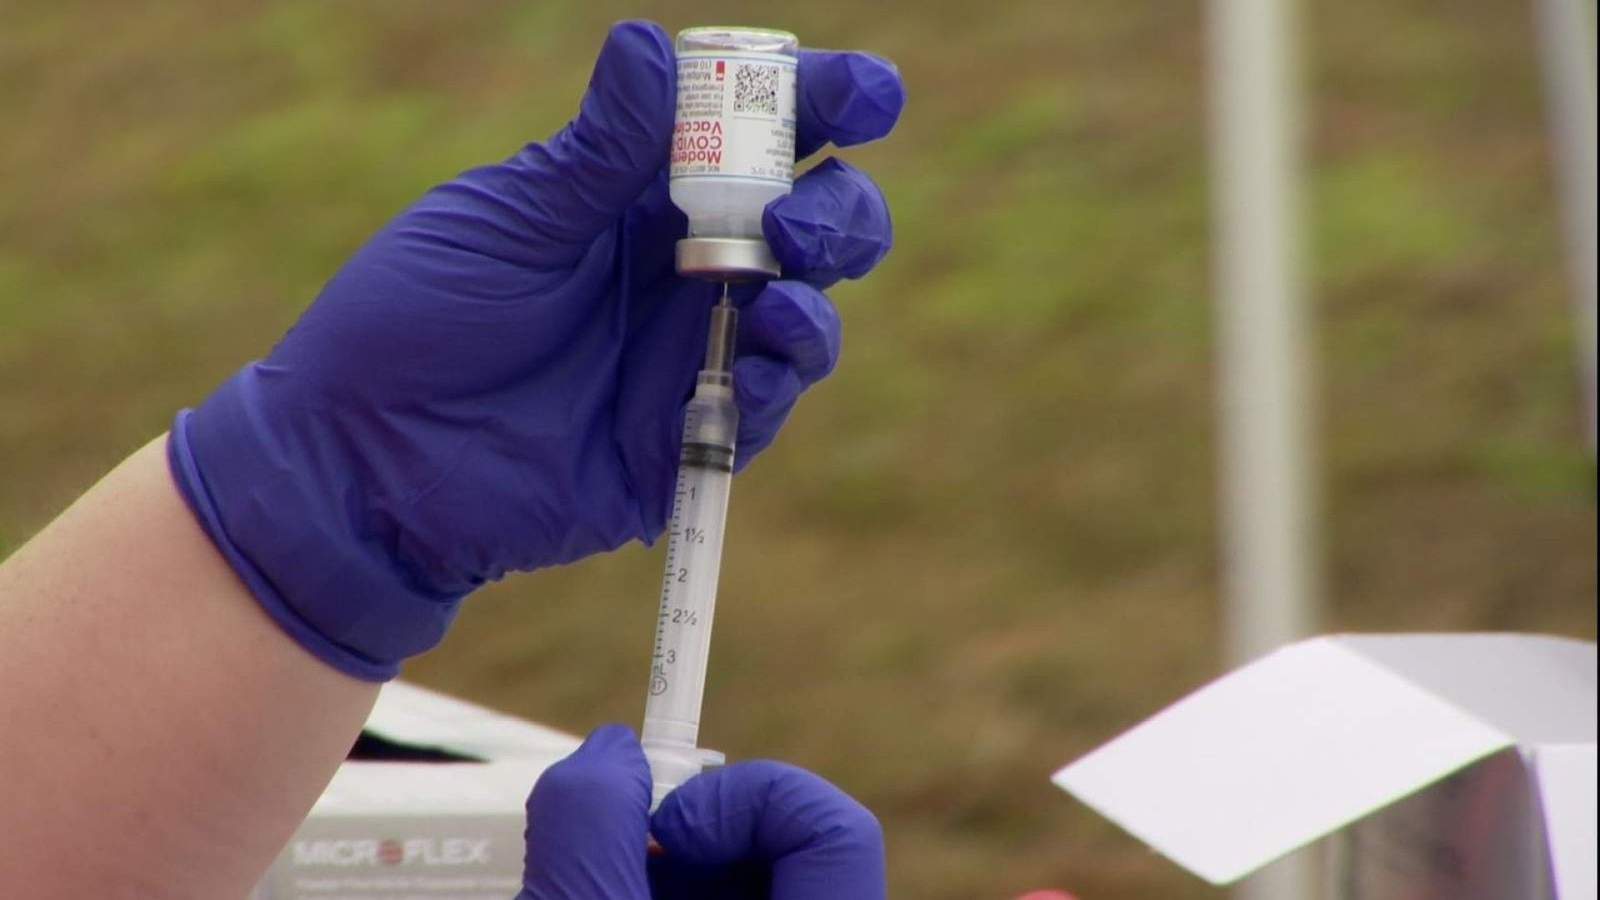 Washington County officials plan to start vaccine appointment process Monday